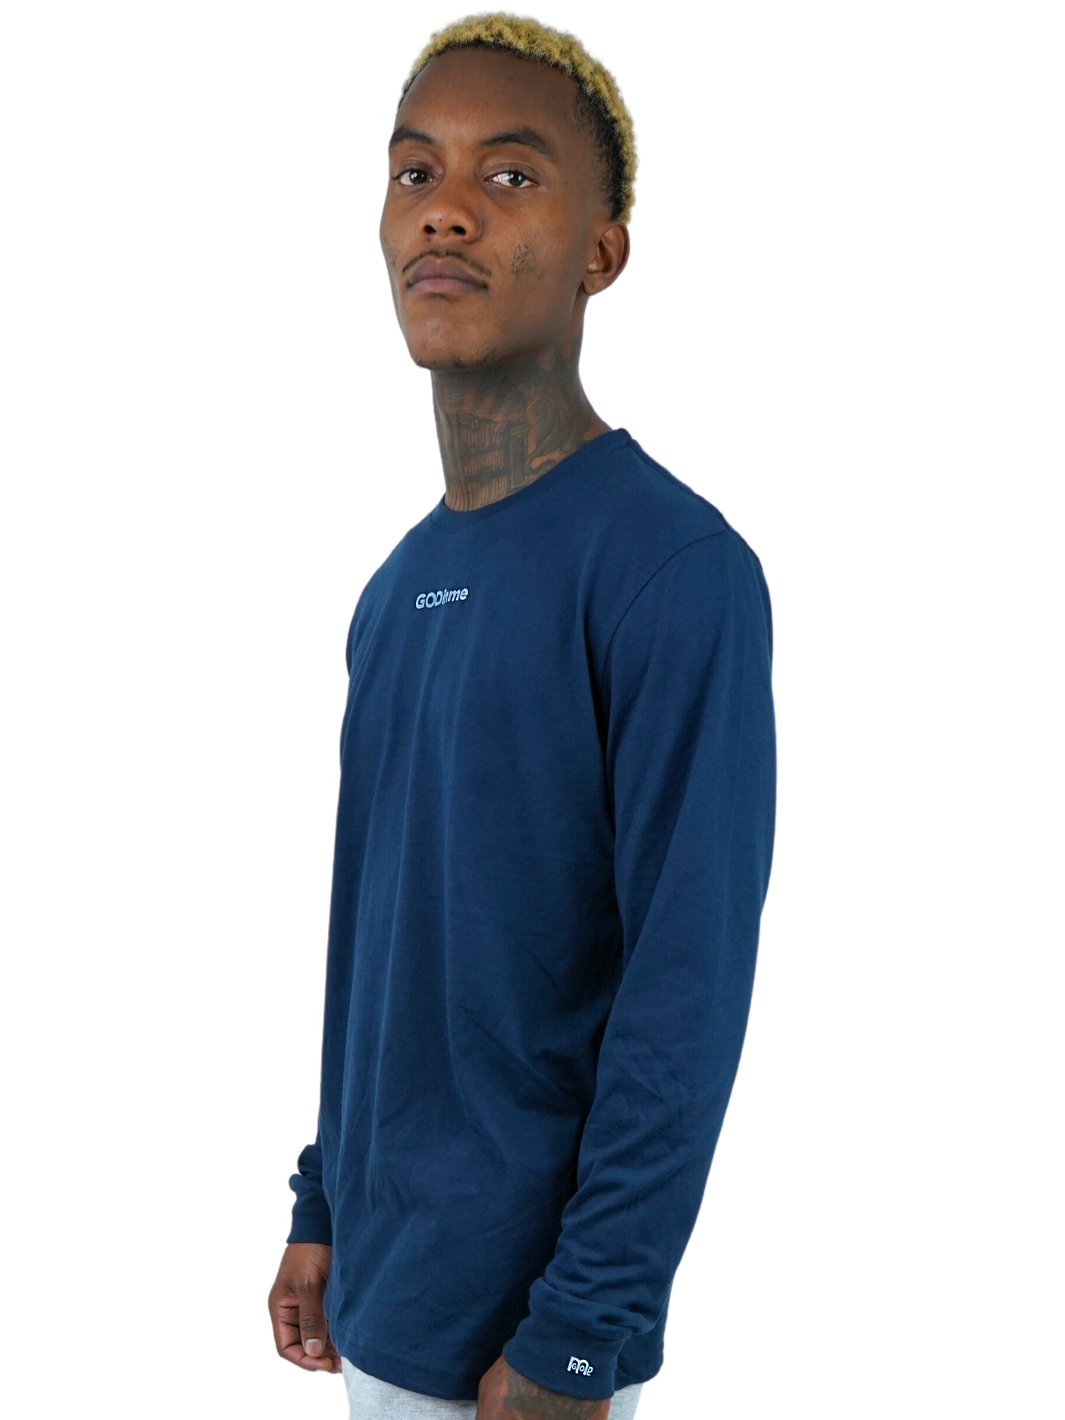 Made to feel like sueded peach fuzz, this Blue long sleeve shirt offers unbeatable comfort. The GODinme printed on front chest and the logo on sleeve cuffs and upper back represent boldness and style.